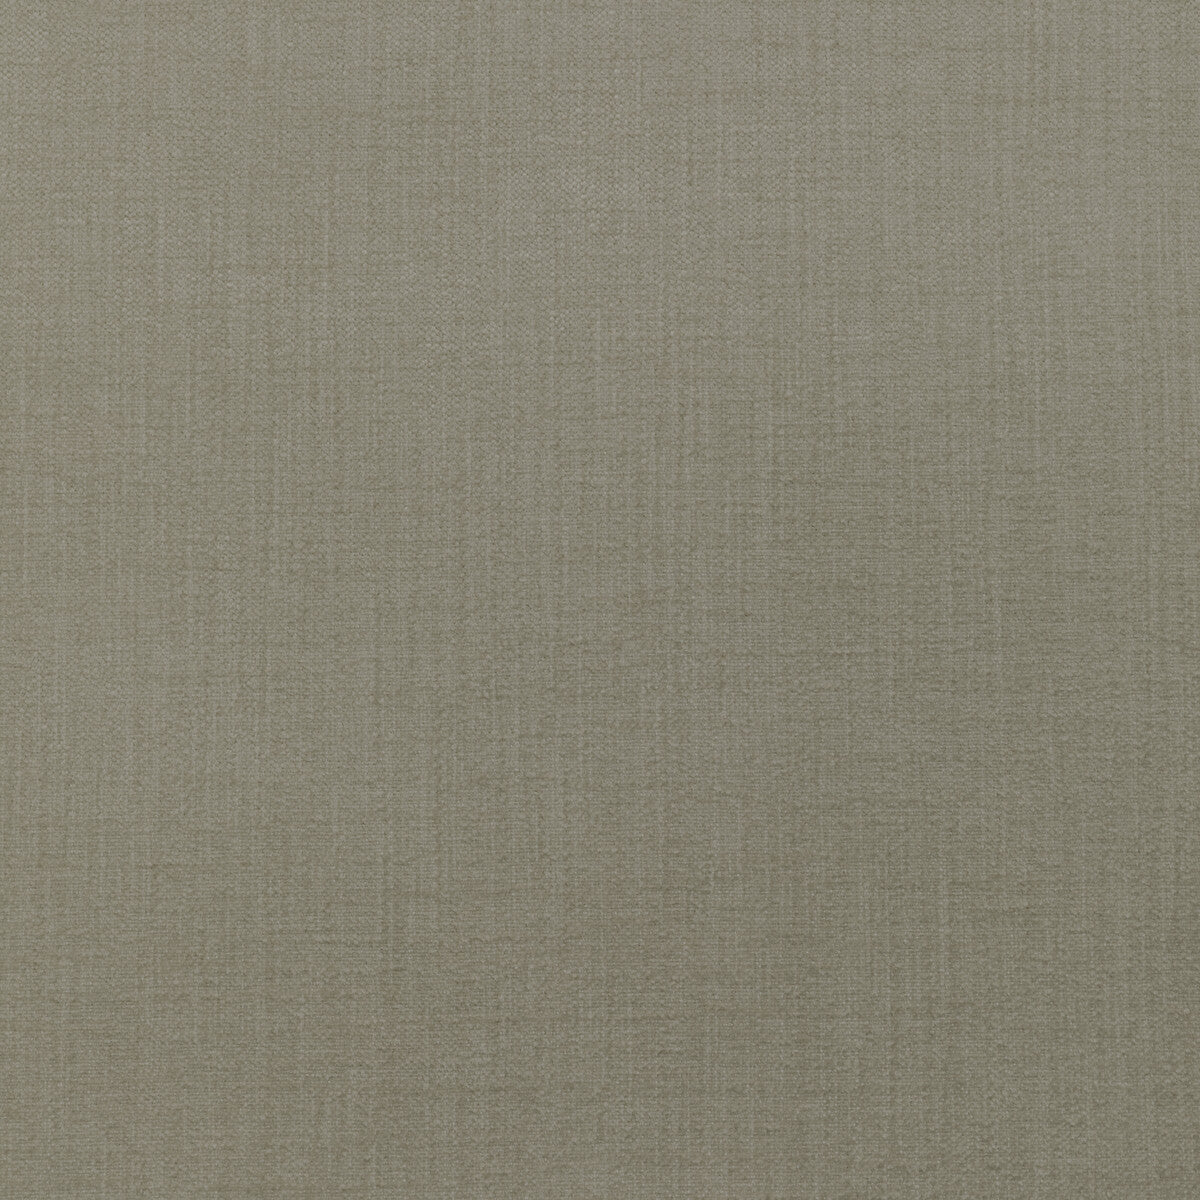 Accommodate fabric in pumice color - pattern 36255.106.0 - by Kravet Contract in the Supreen collection